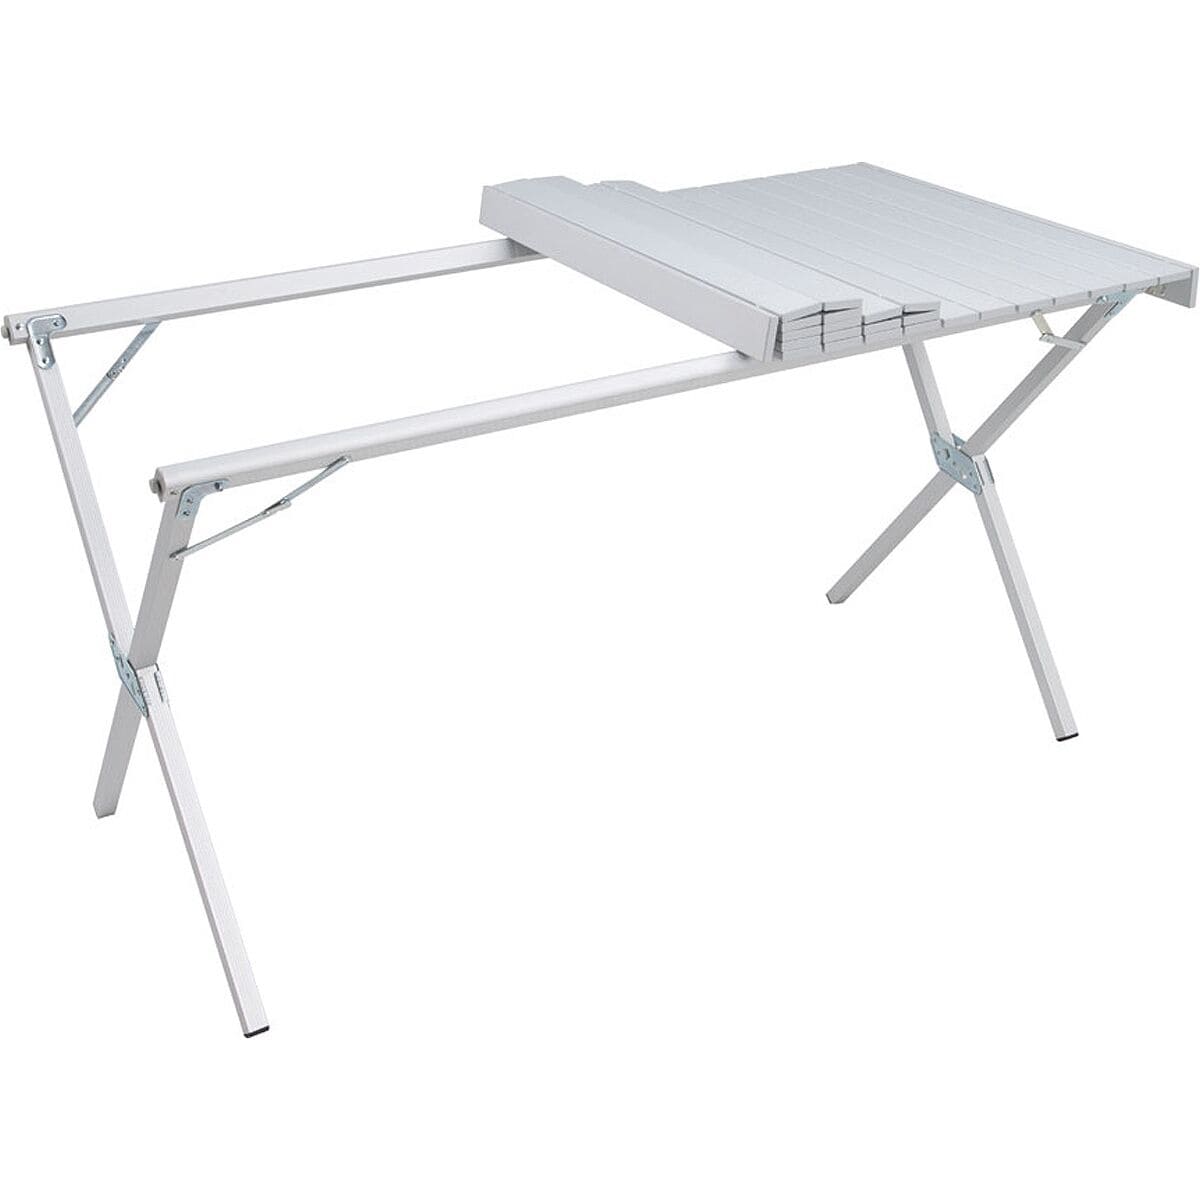 XL Camp Dining Table